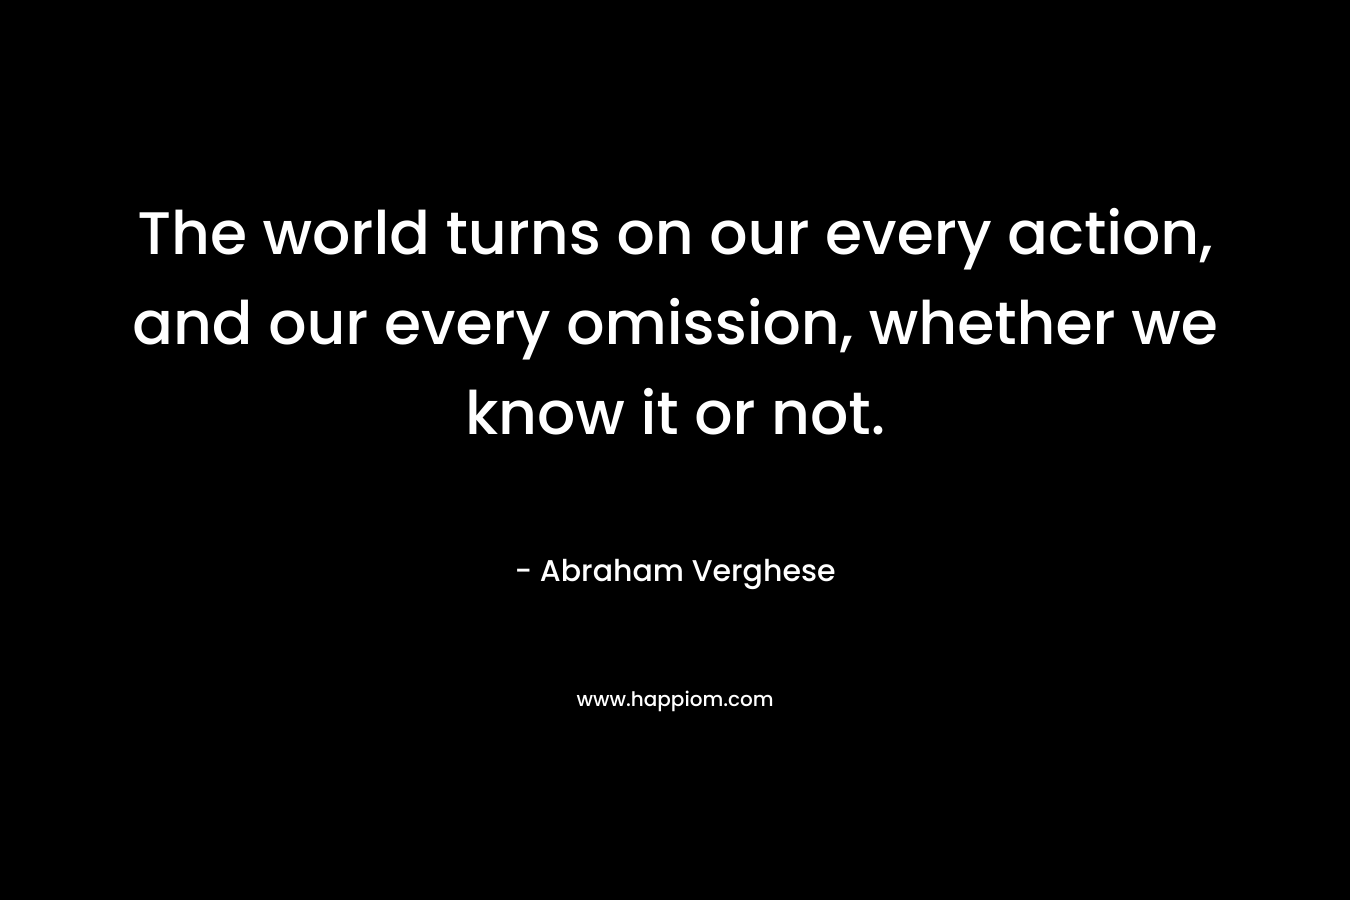 The world turns on our every action, and our every omission, whether we know it or not. – Abraham Verghese